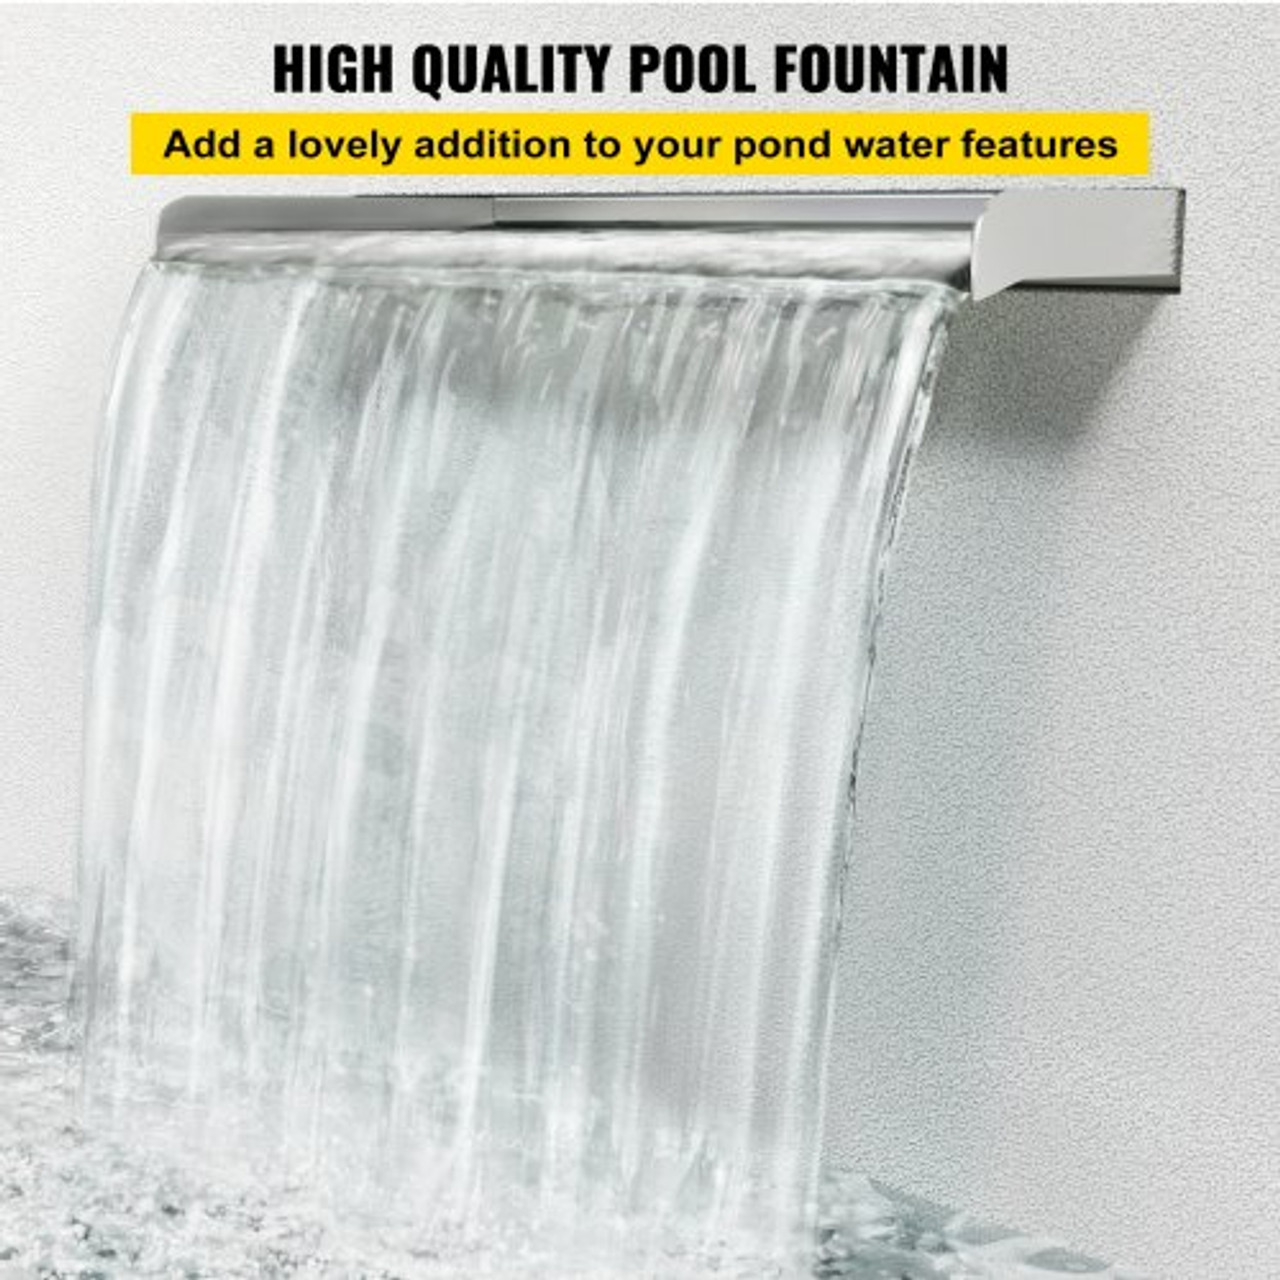 Pool Fountain Stainless Steel Pool Waterfall 23.6" x 4.5" x 3.1"(W x D x H) Waterfall Spillway with Pipe Connector Rectangular Garden Outdoor, Silver